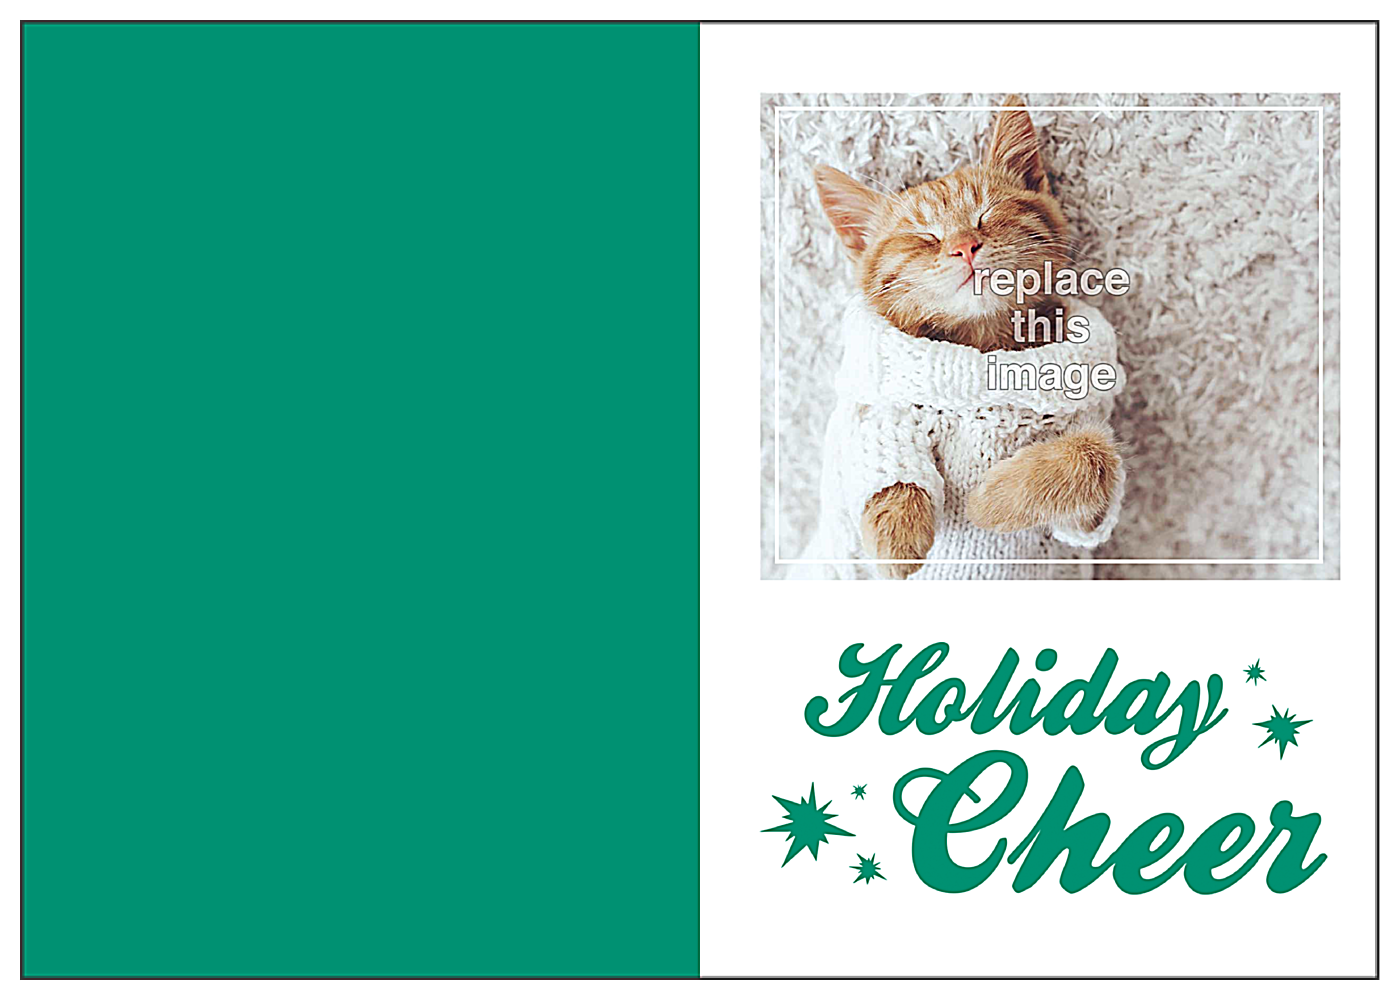 Comfort and Cheer front - Greeting Cards Maker